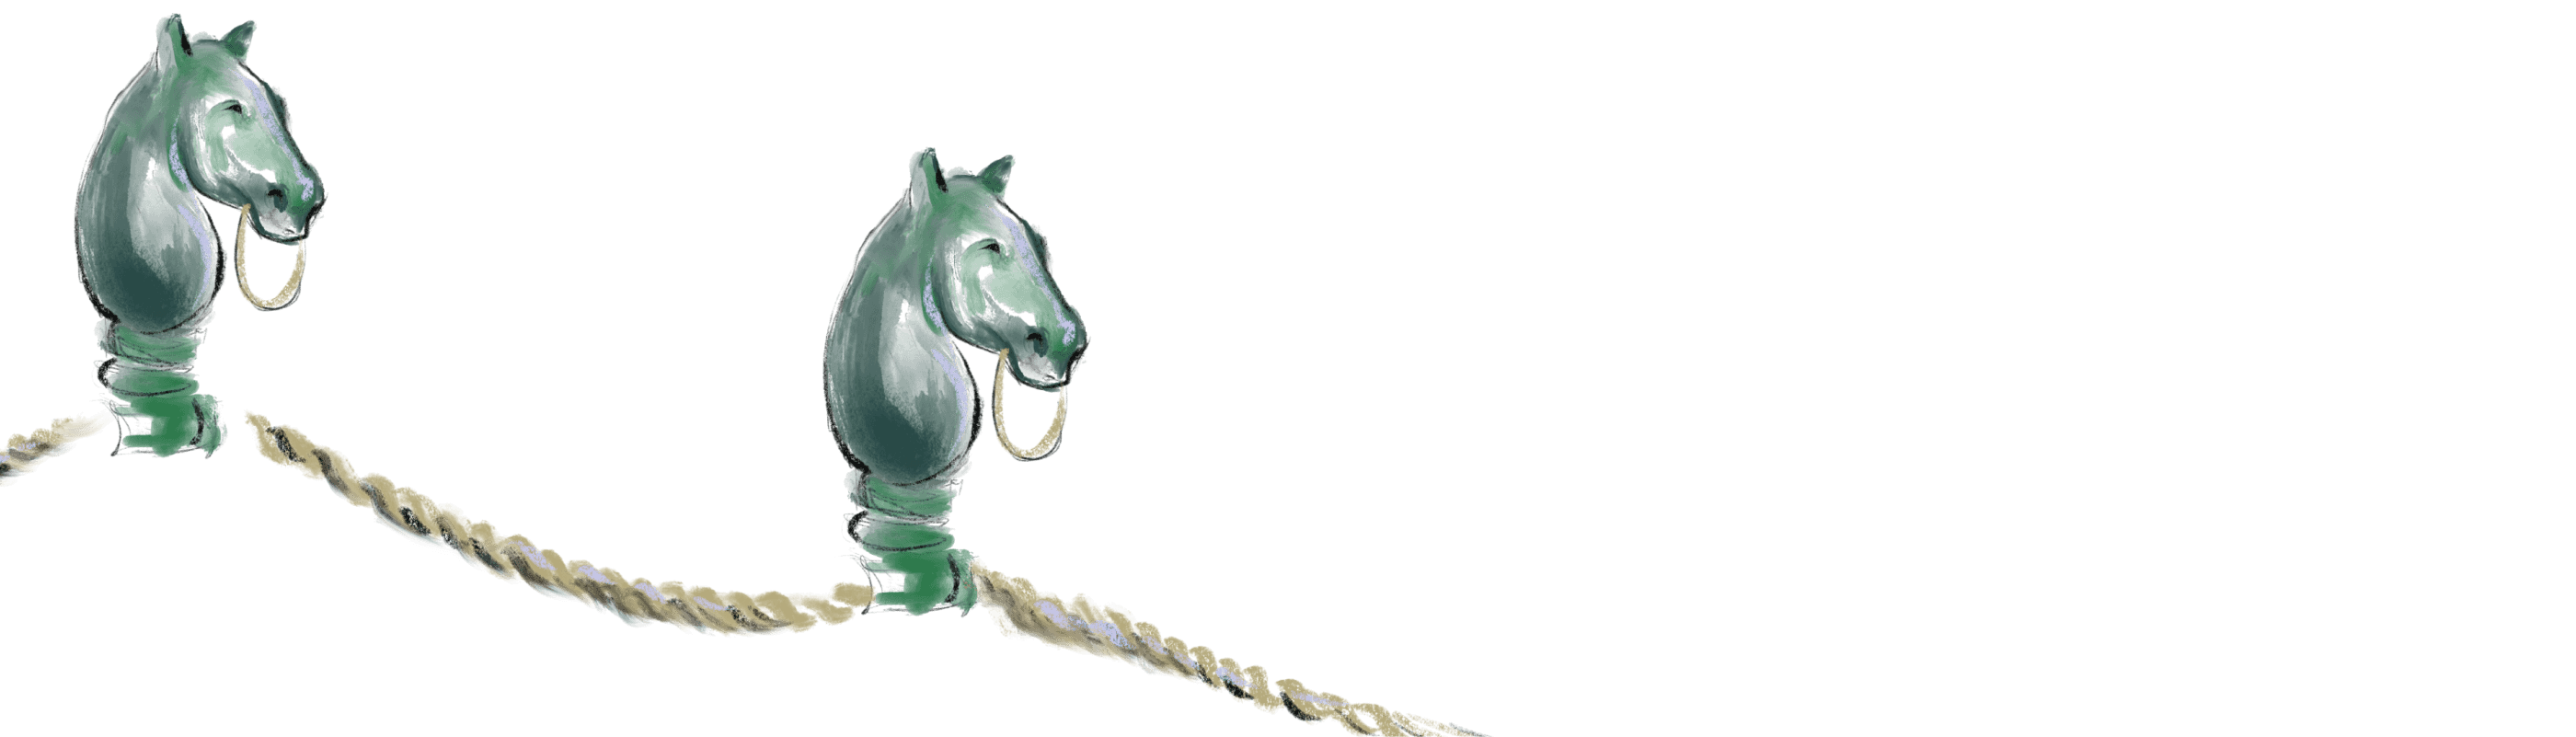 horse and rope illustration left